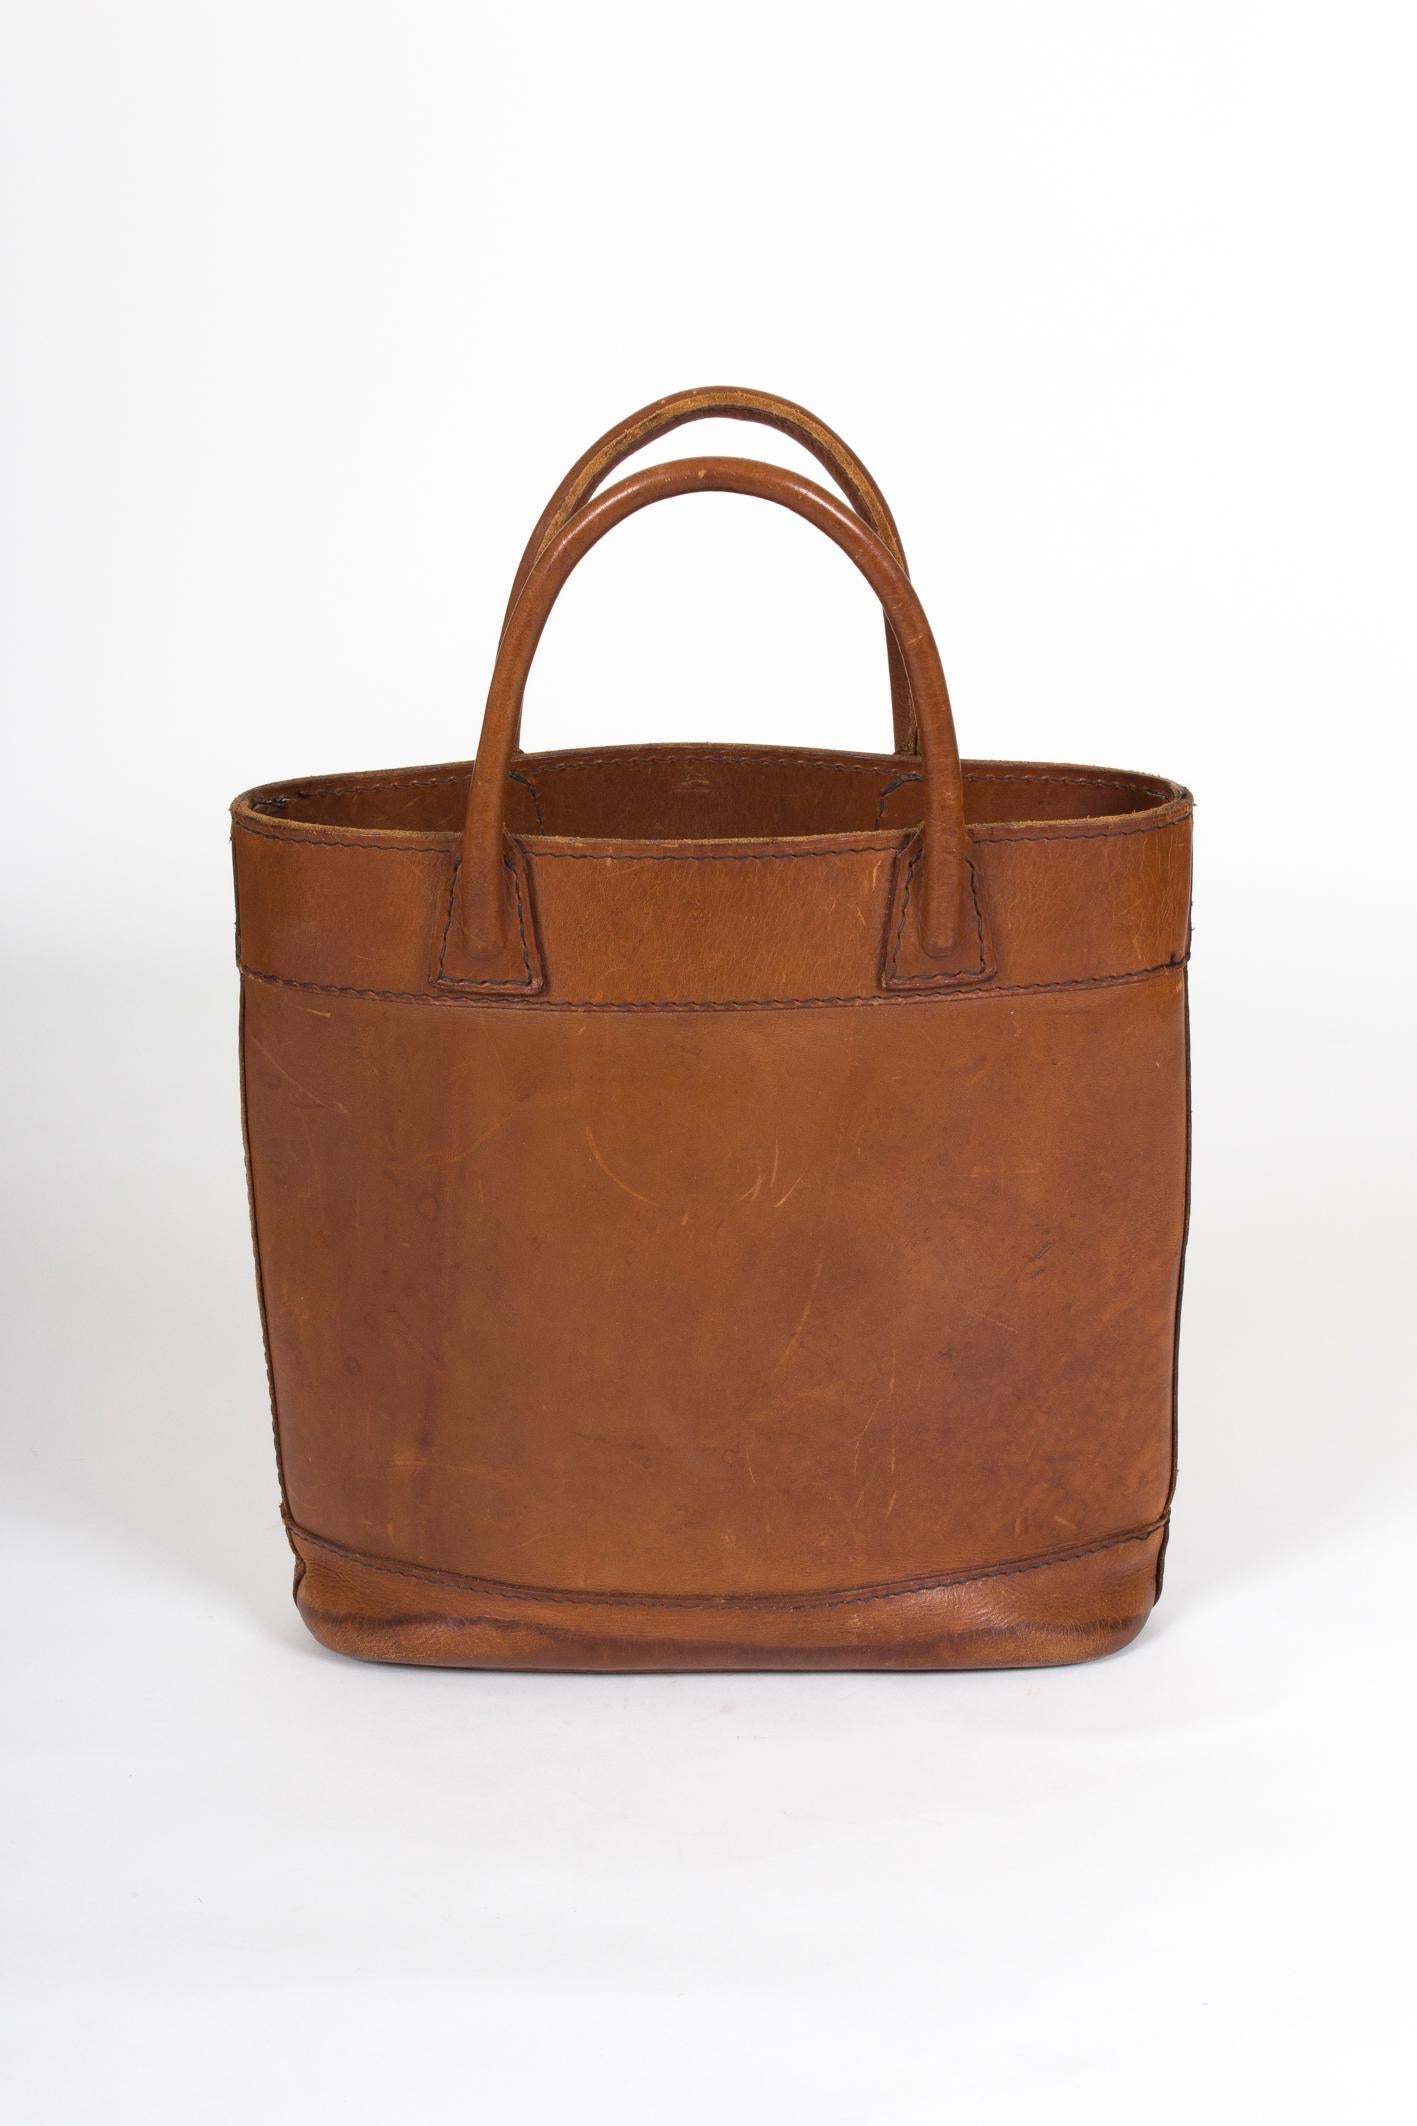 Mid-Century Modern Rare and Marked Collectors Auböck Midcentury Leather Bag, Late 1950s-Early 1960s